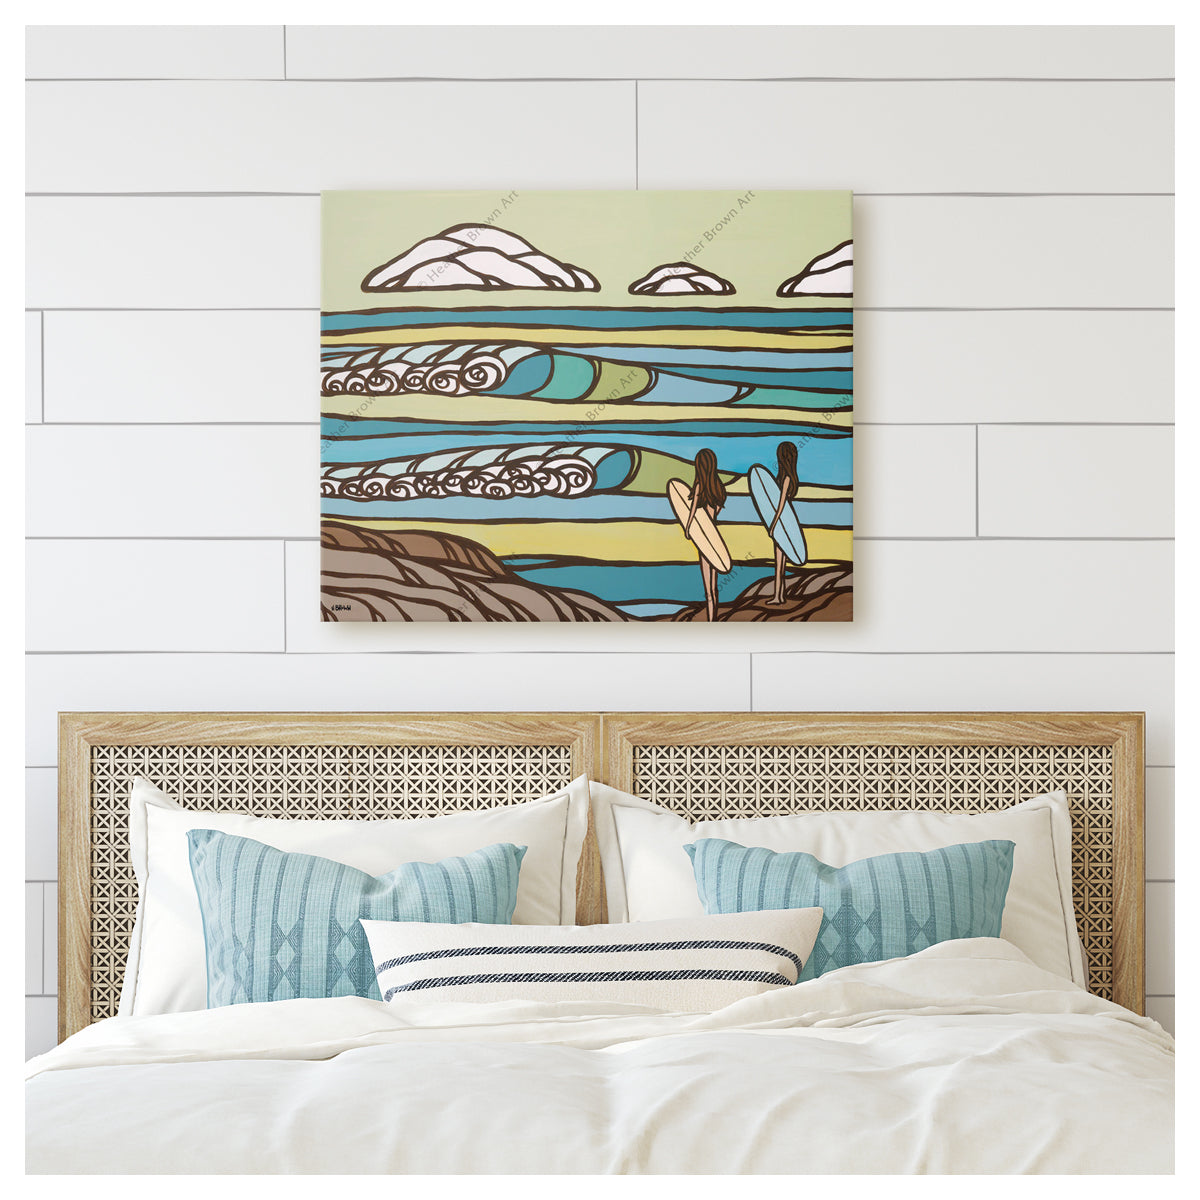 South Point Canvas Giclée by Hawaii surf artist Heather Brown mockup